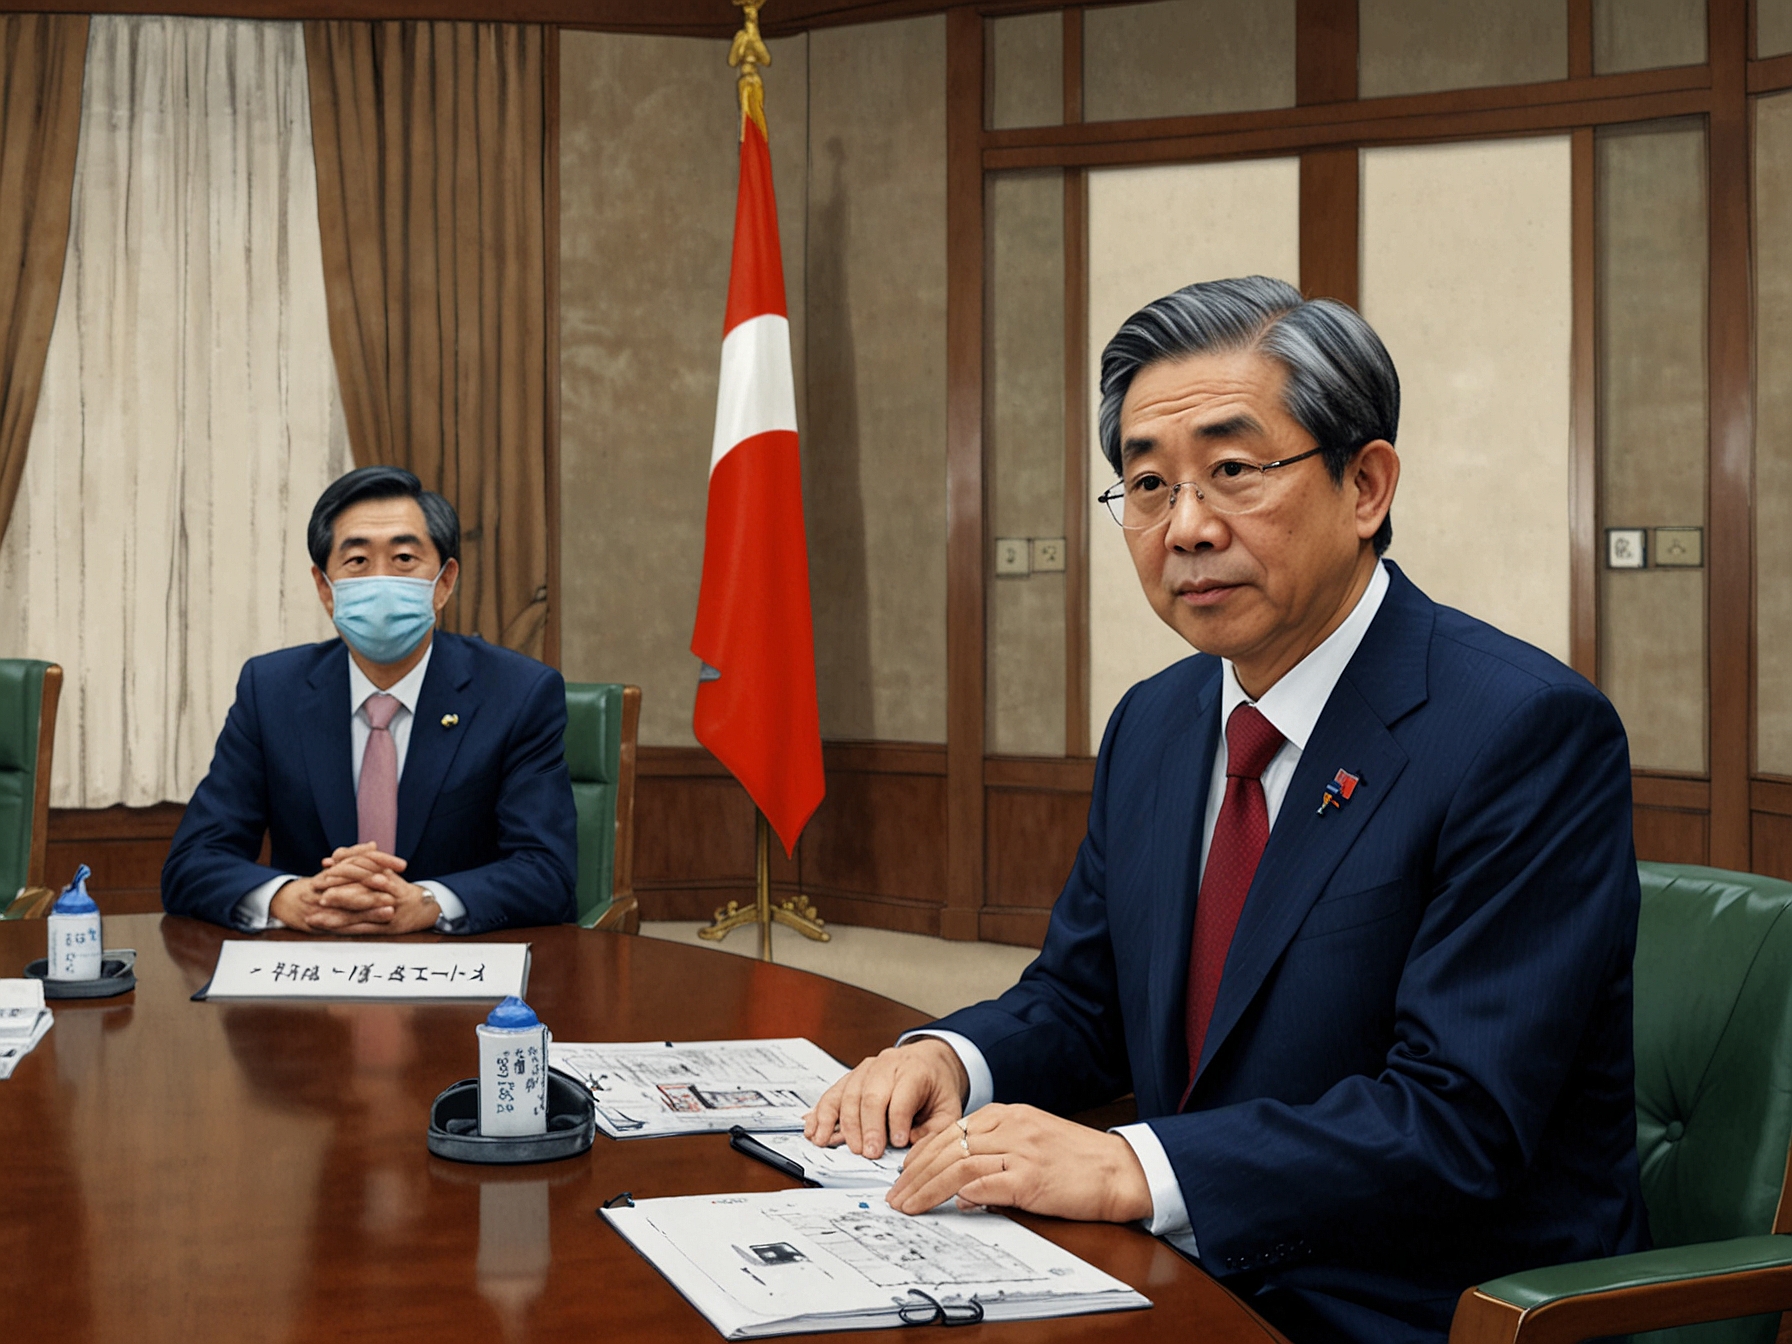 Luxon in a high-level meeting with Japan's Defense Minister, discussing regional security, defense cooperation, and potential joint initiatives to bolster strategic partnerships.